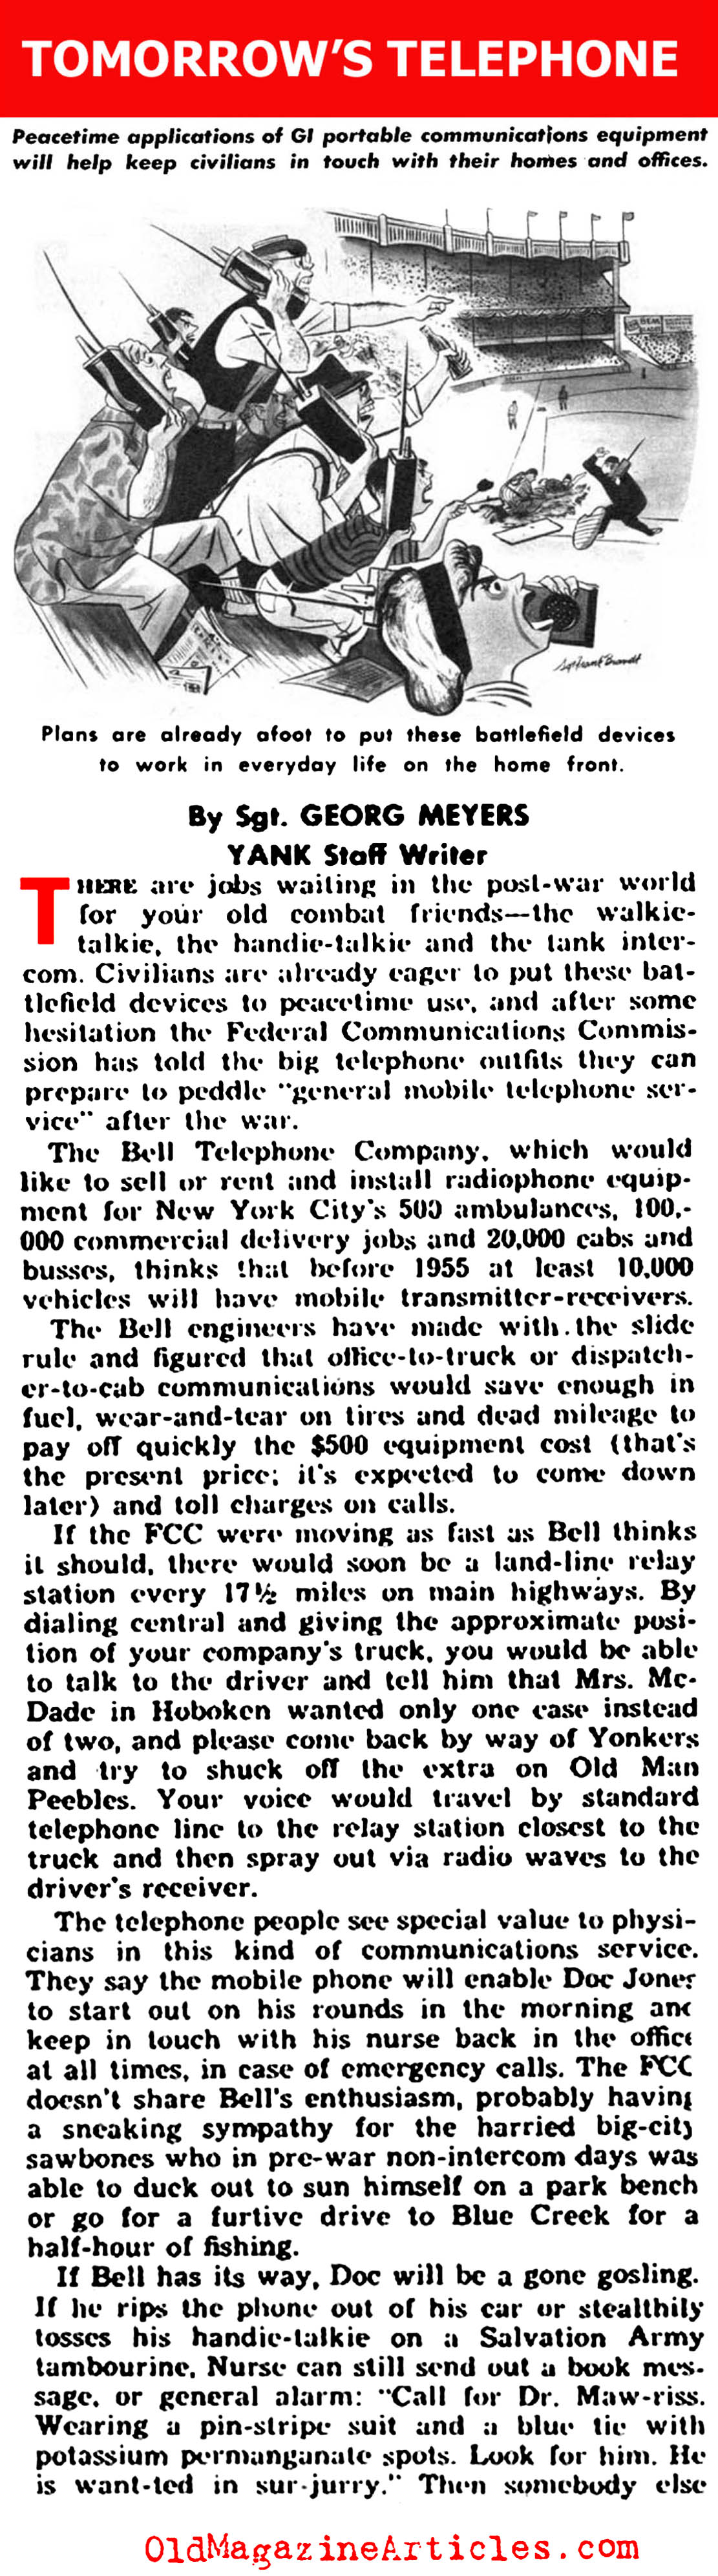 Anticipating Cell Phones in 1945  (Yank Magazine, 1945)